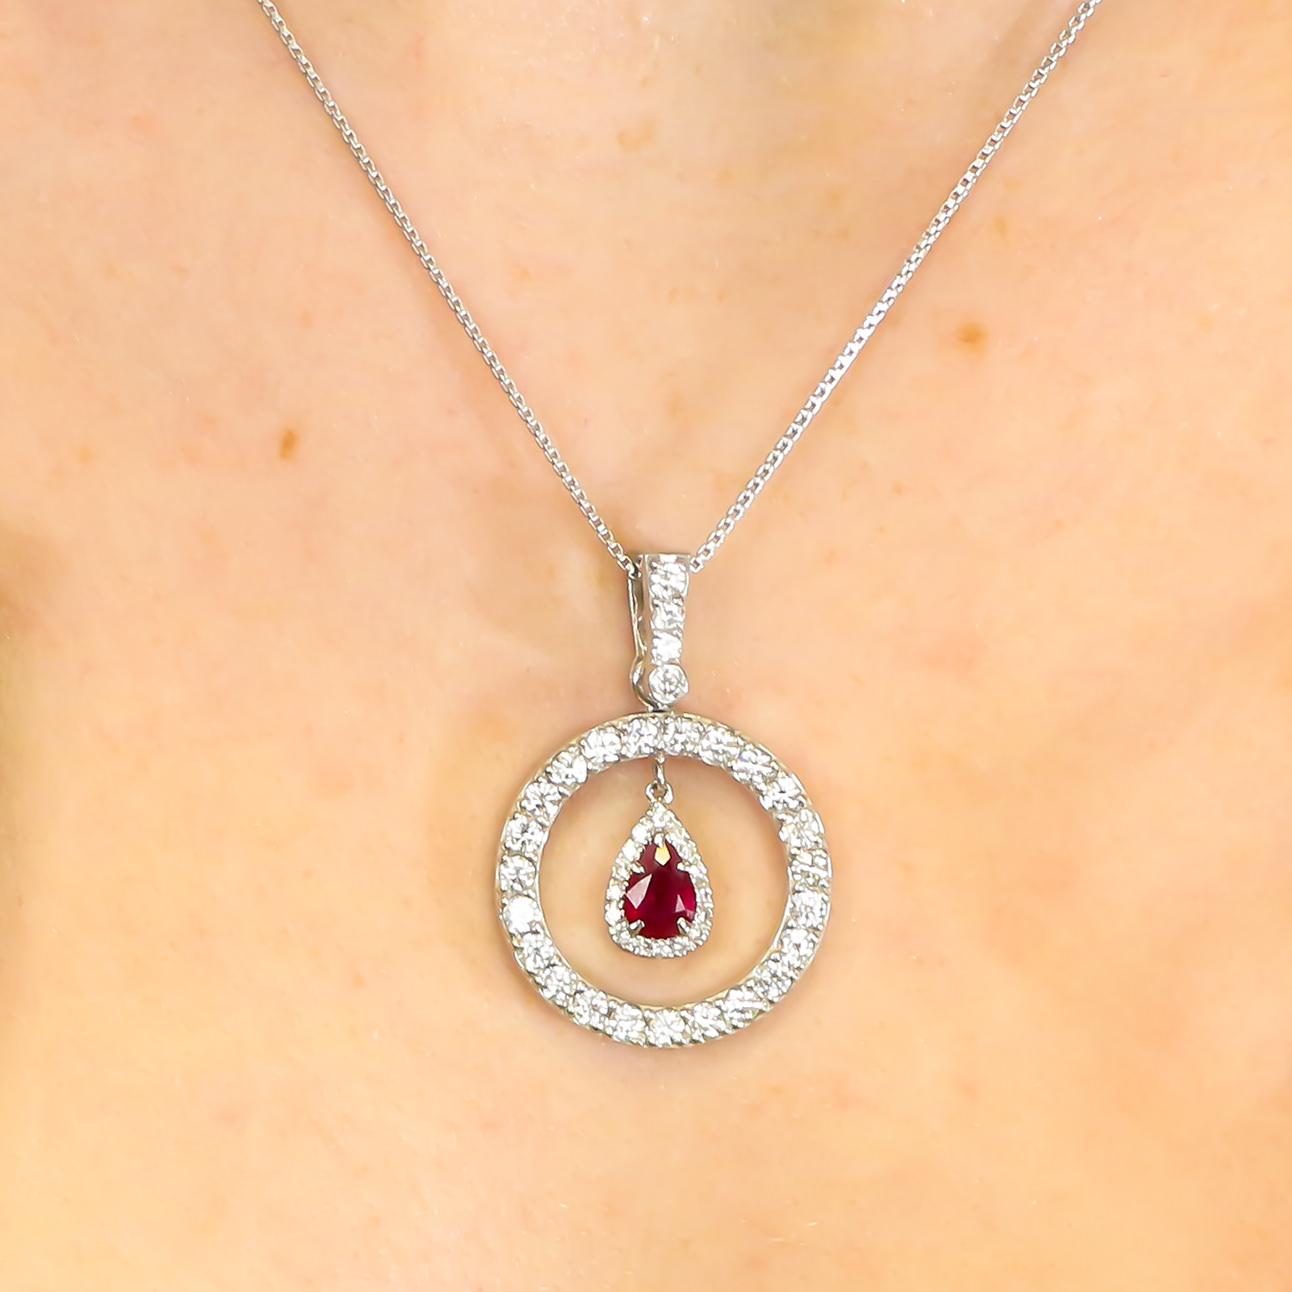 Ruby = 0.60 Carat

Diamonds = 1.50 Carats
( Color: F, Clarity: VS )

Metal: 18K White Gold

Jewelry Gift Box Included